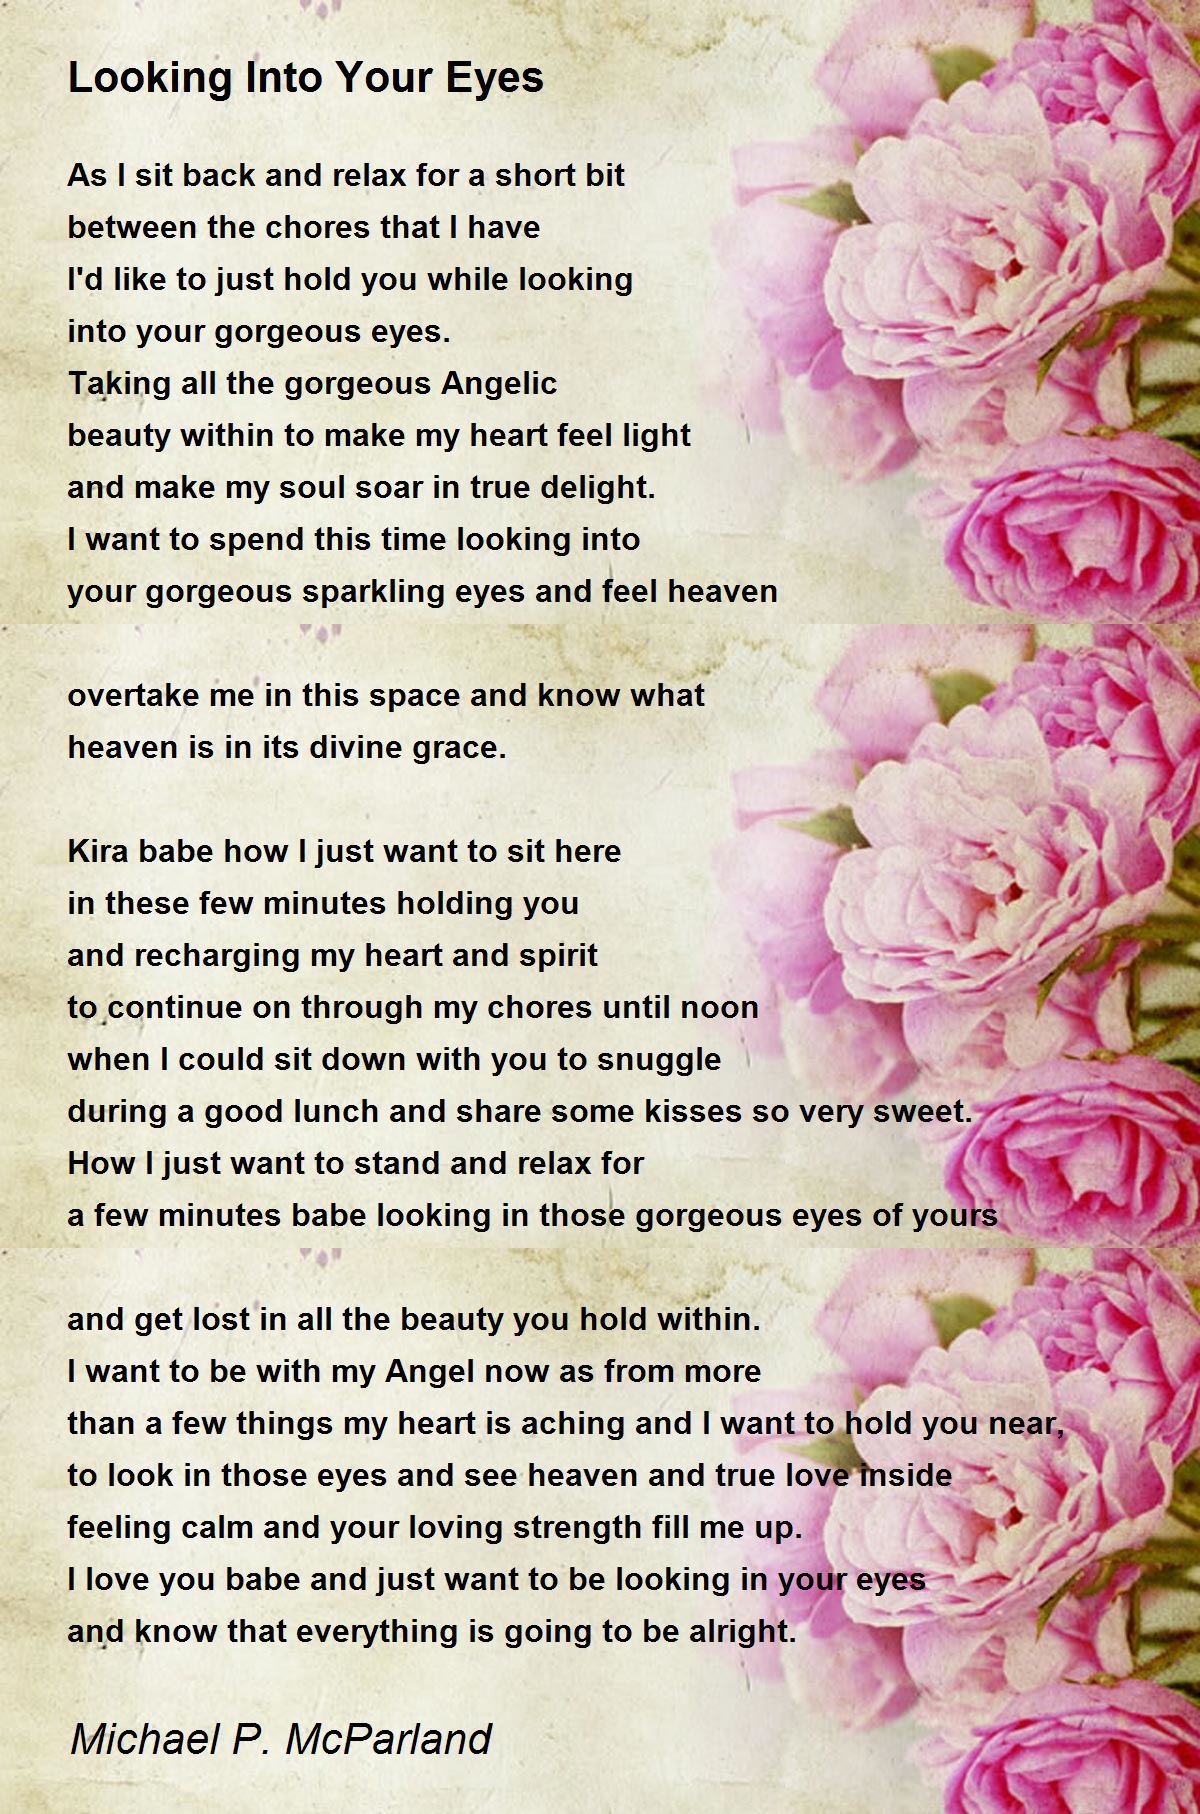 Looking Into Your Eyes - Looking Into Your Eyes Poem by Michael P ...